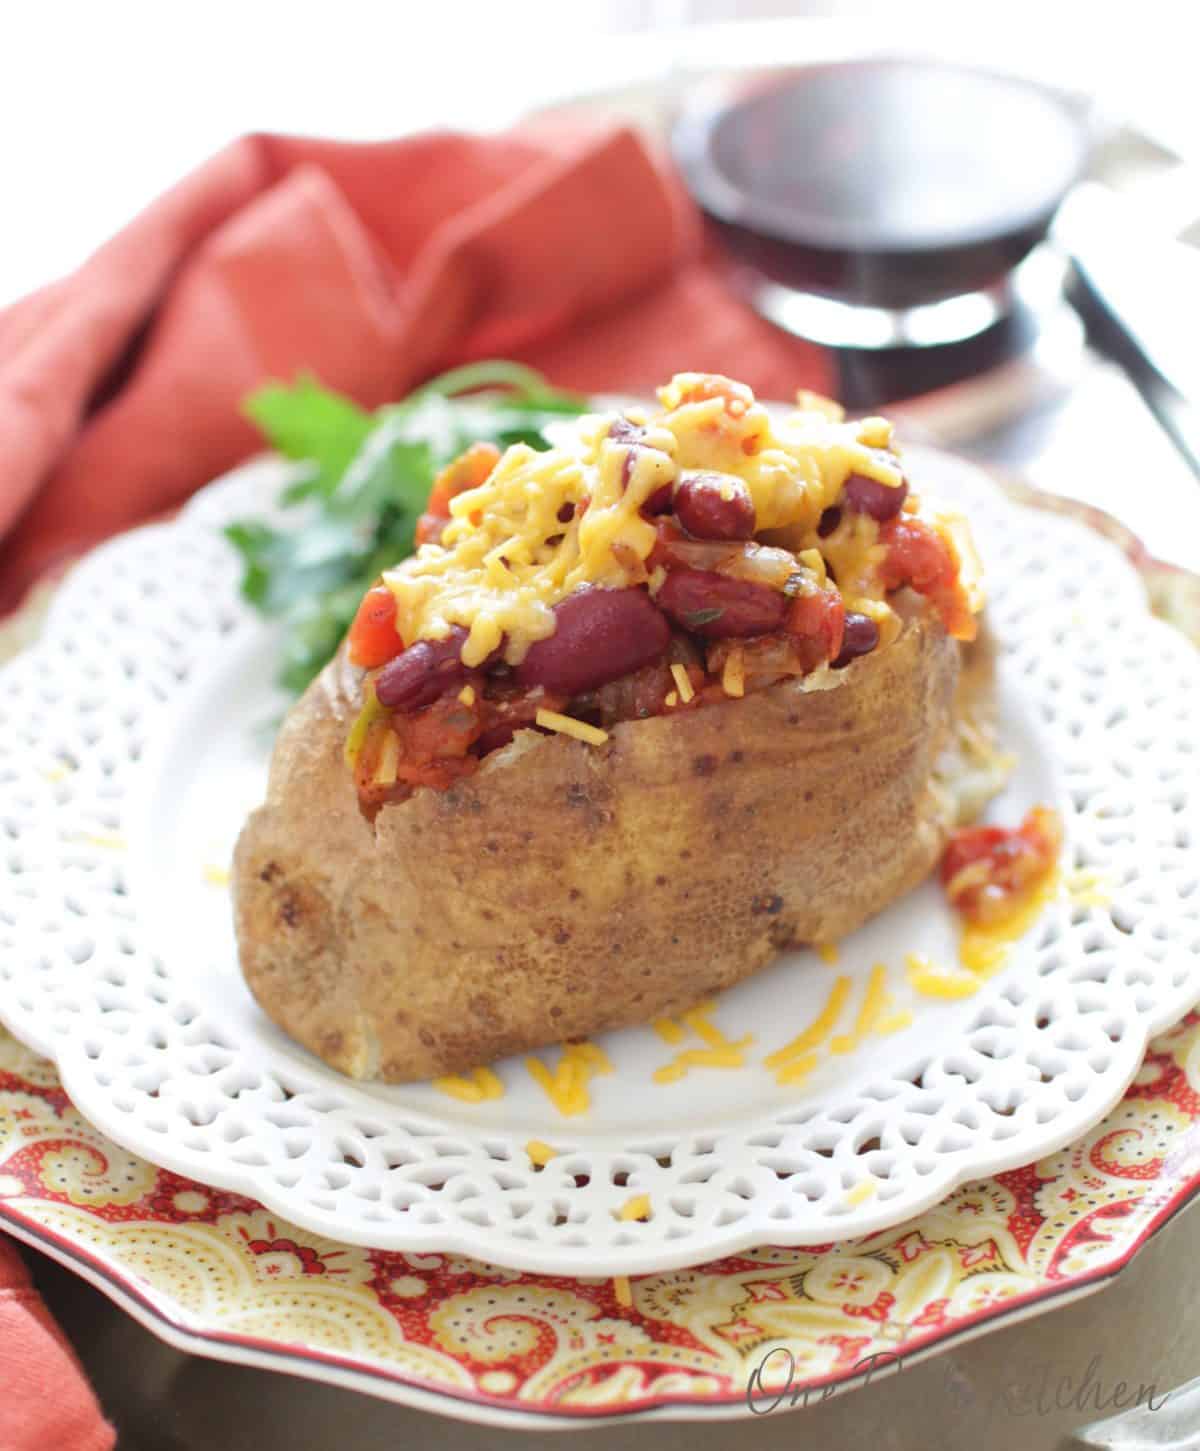 a baked potato topped with beans and cheese on a white plate next to a glass of wine.